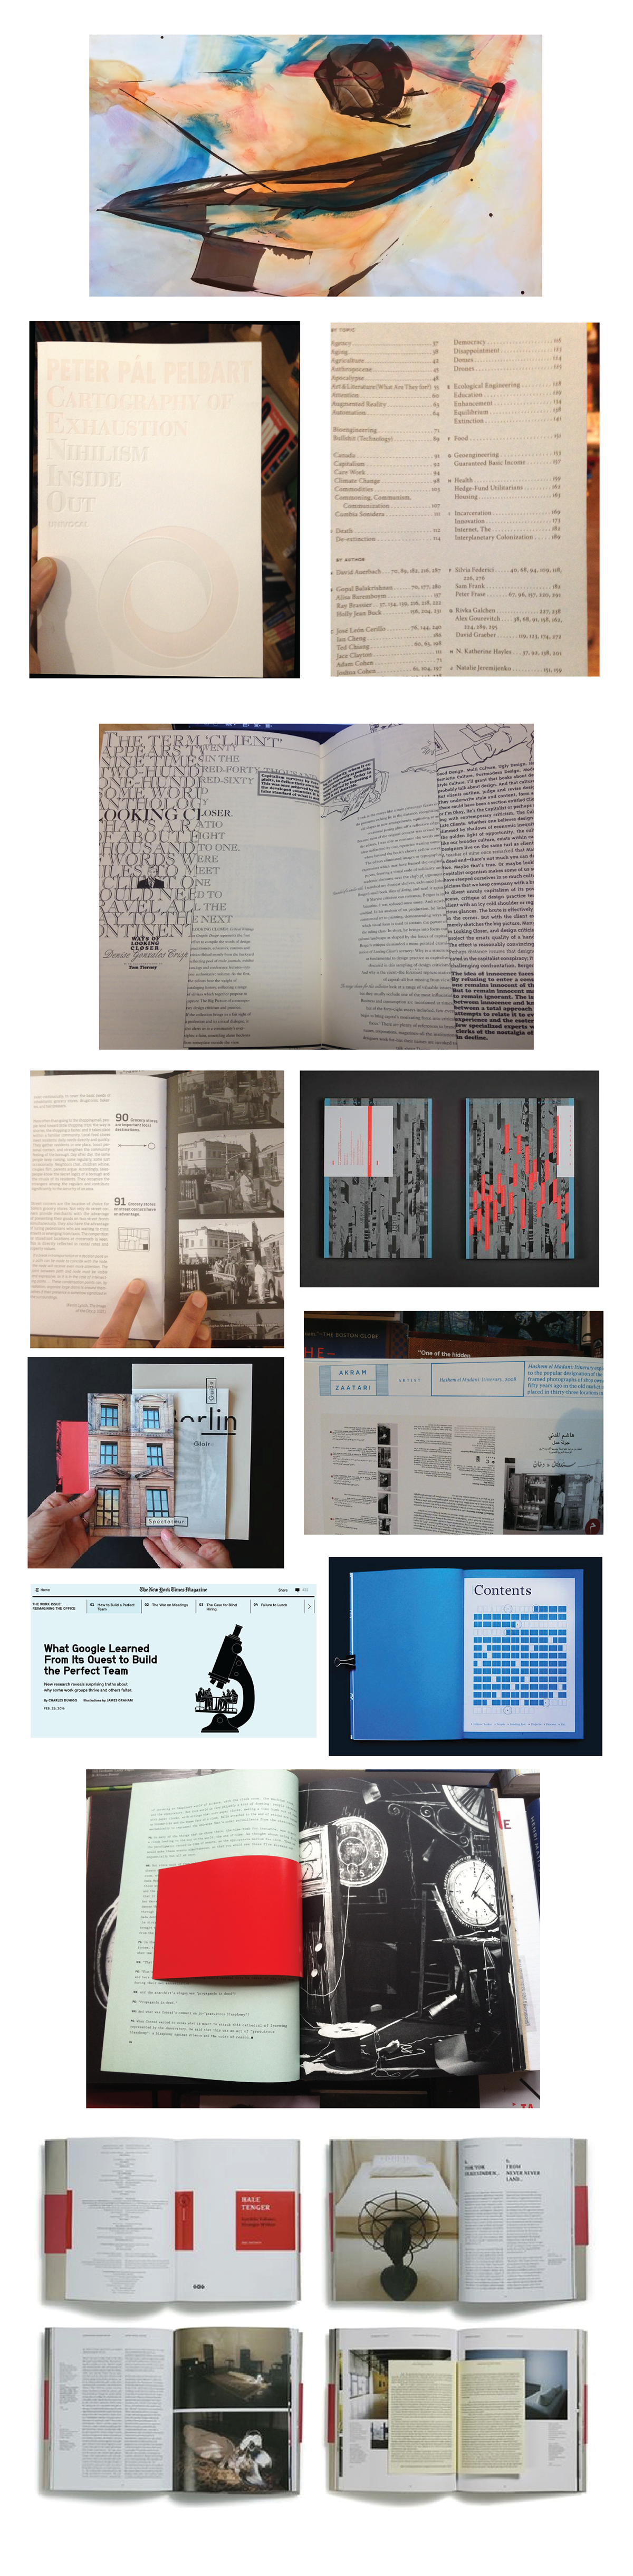 thesis Ethnography laser cutter Book Binding communications design book design